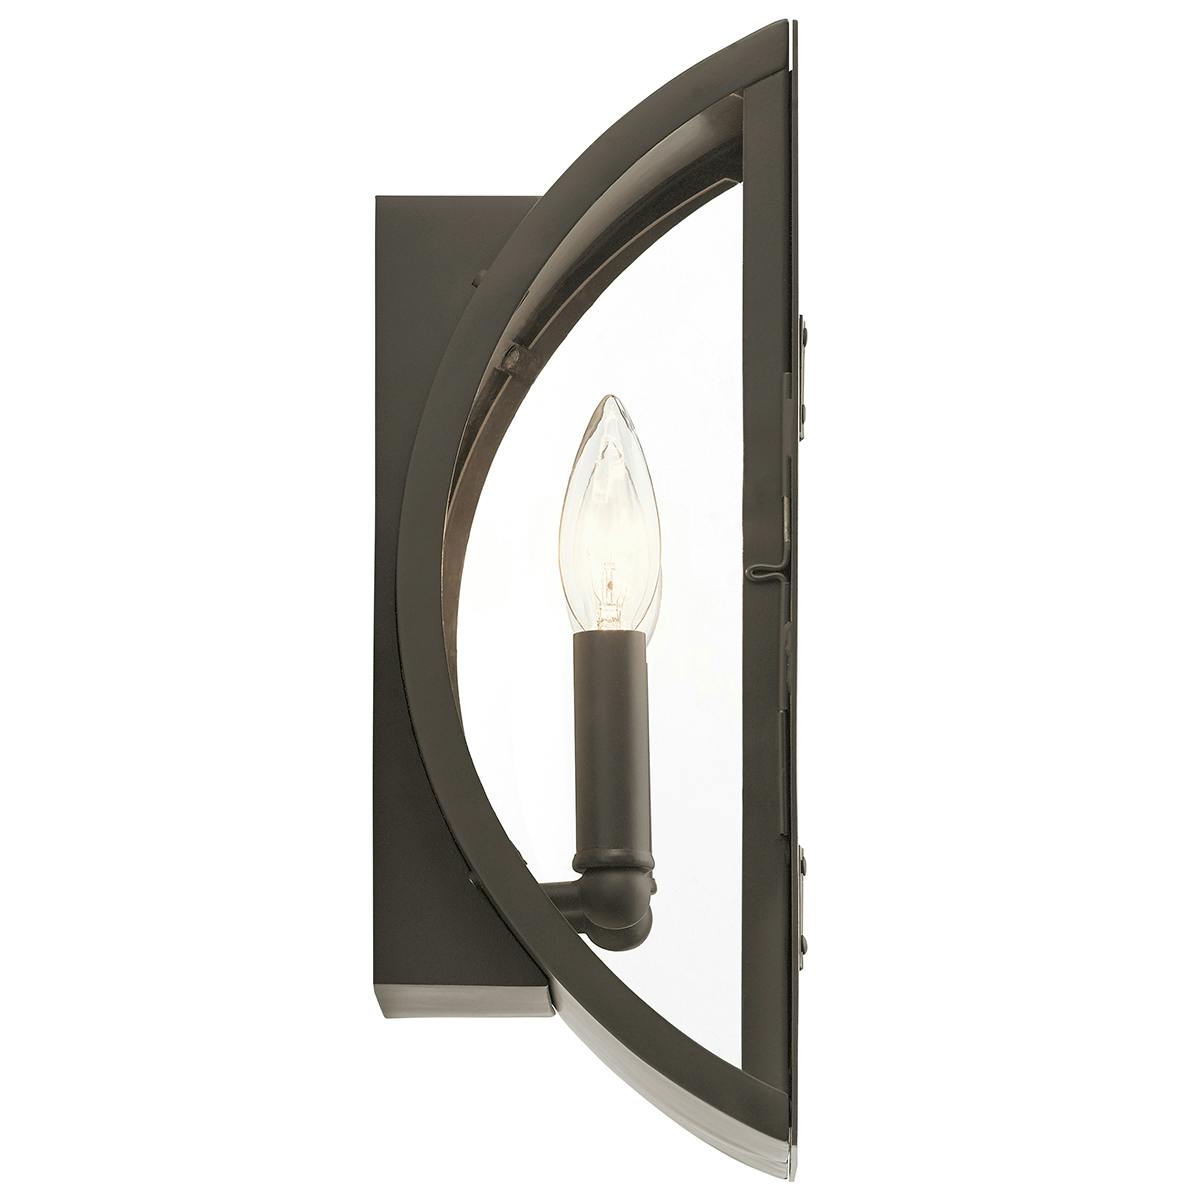 Profile view of the Narelle 13.5" Wall Light Olde Bronze on a white background